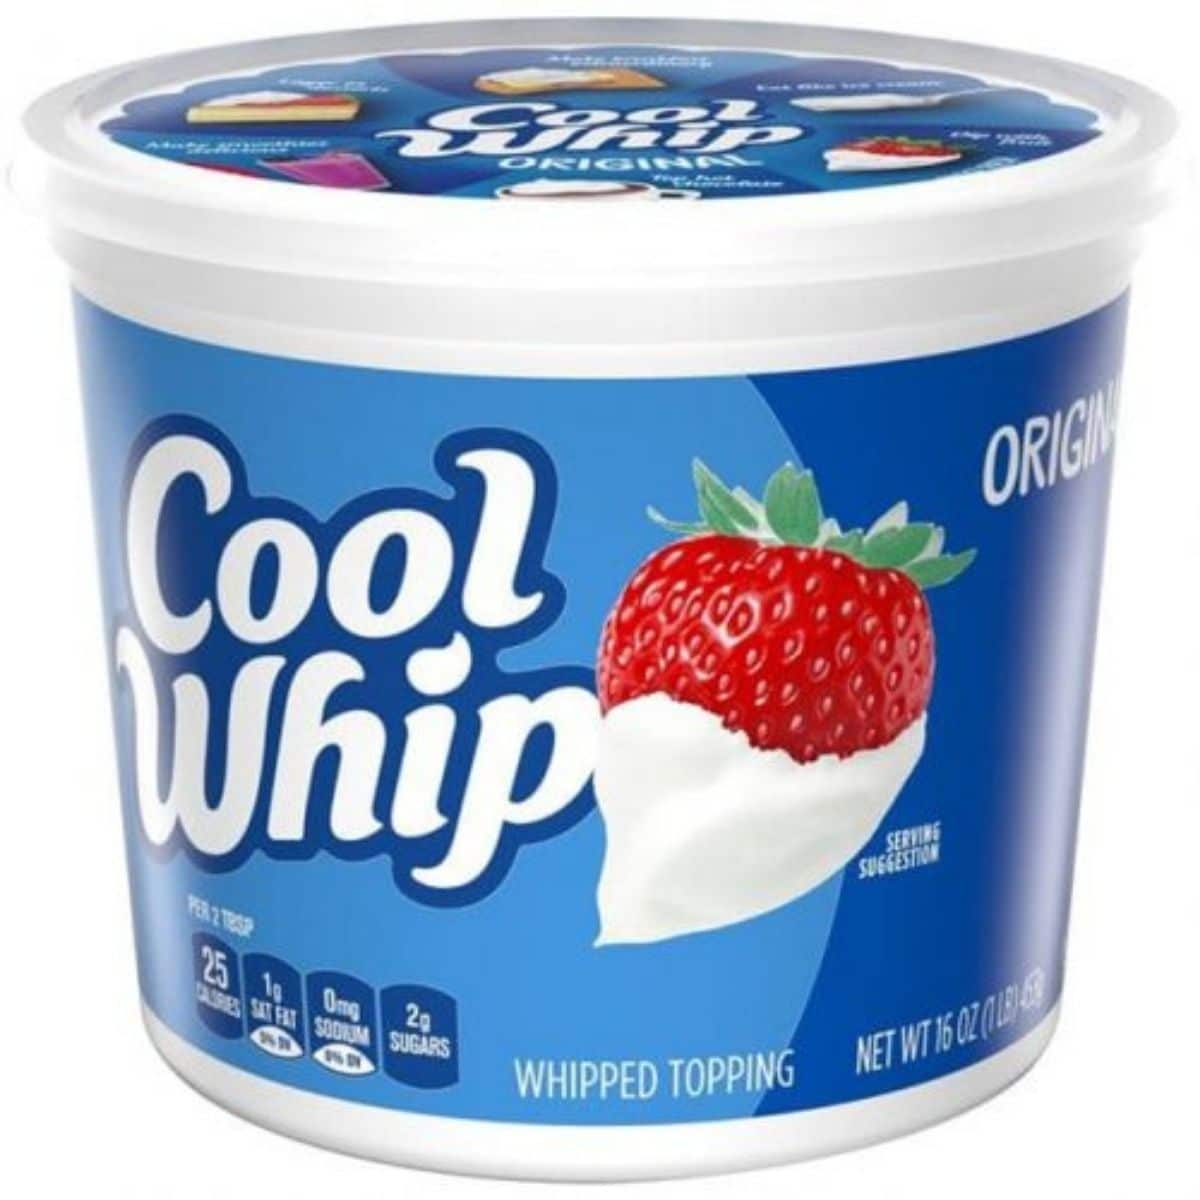 a tub of cool whip.